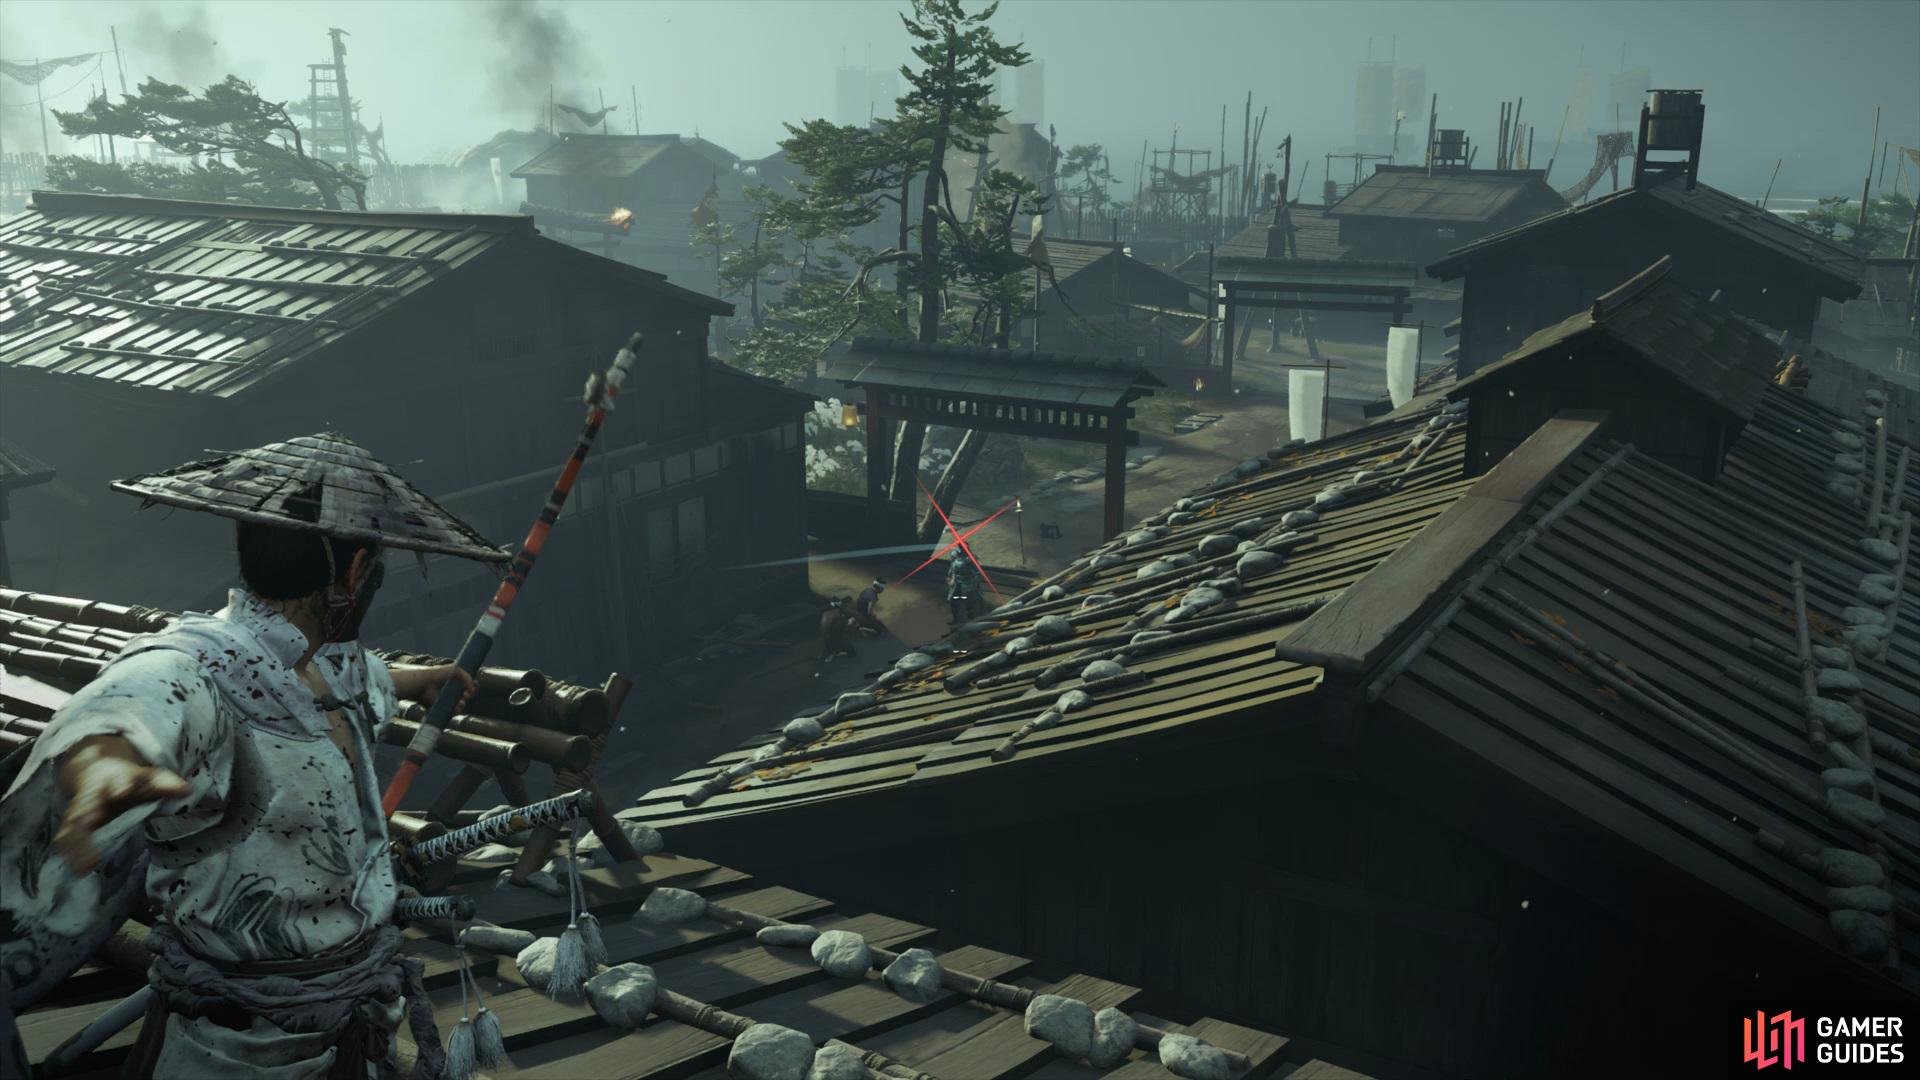 Use the Roofs to take down the enemies